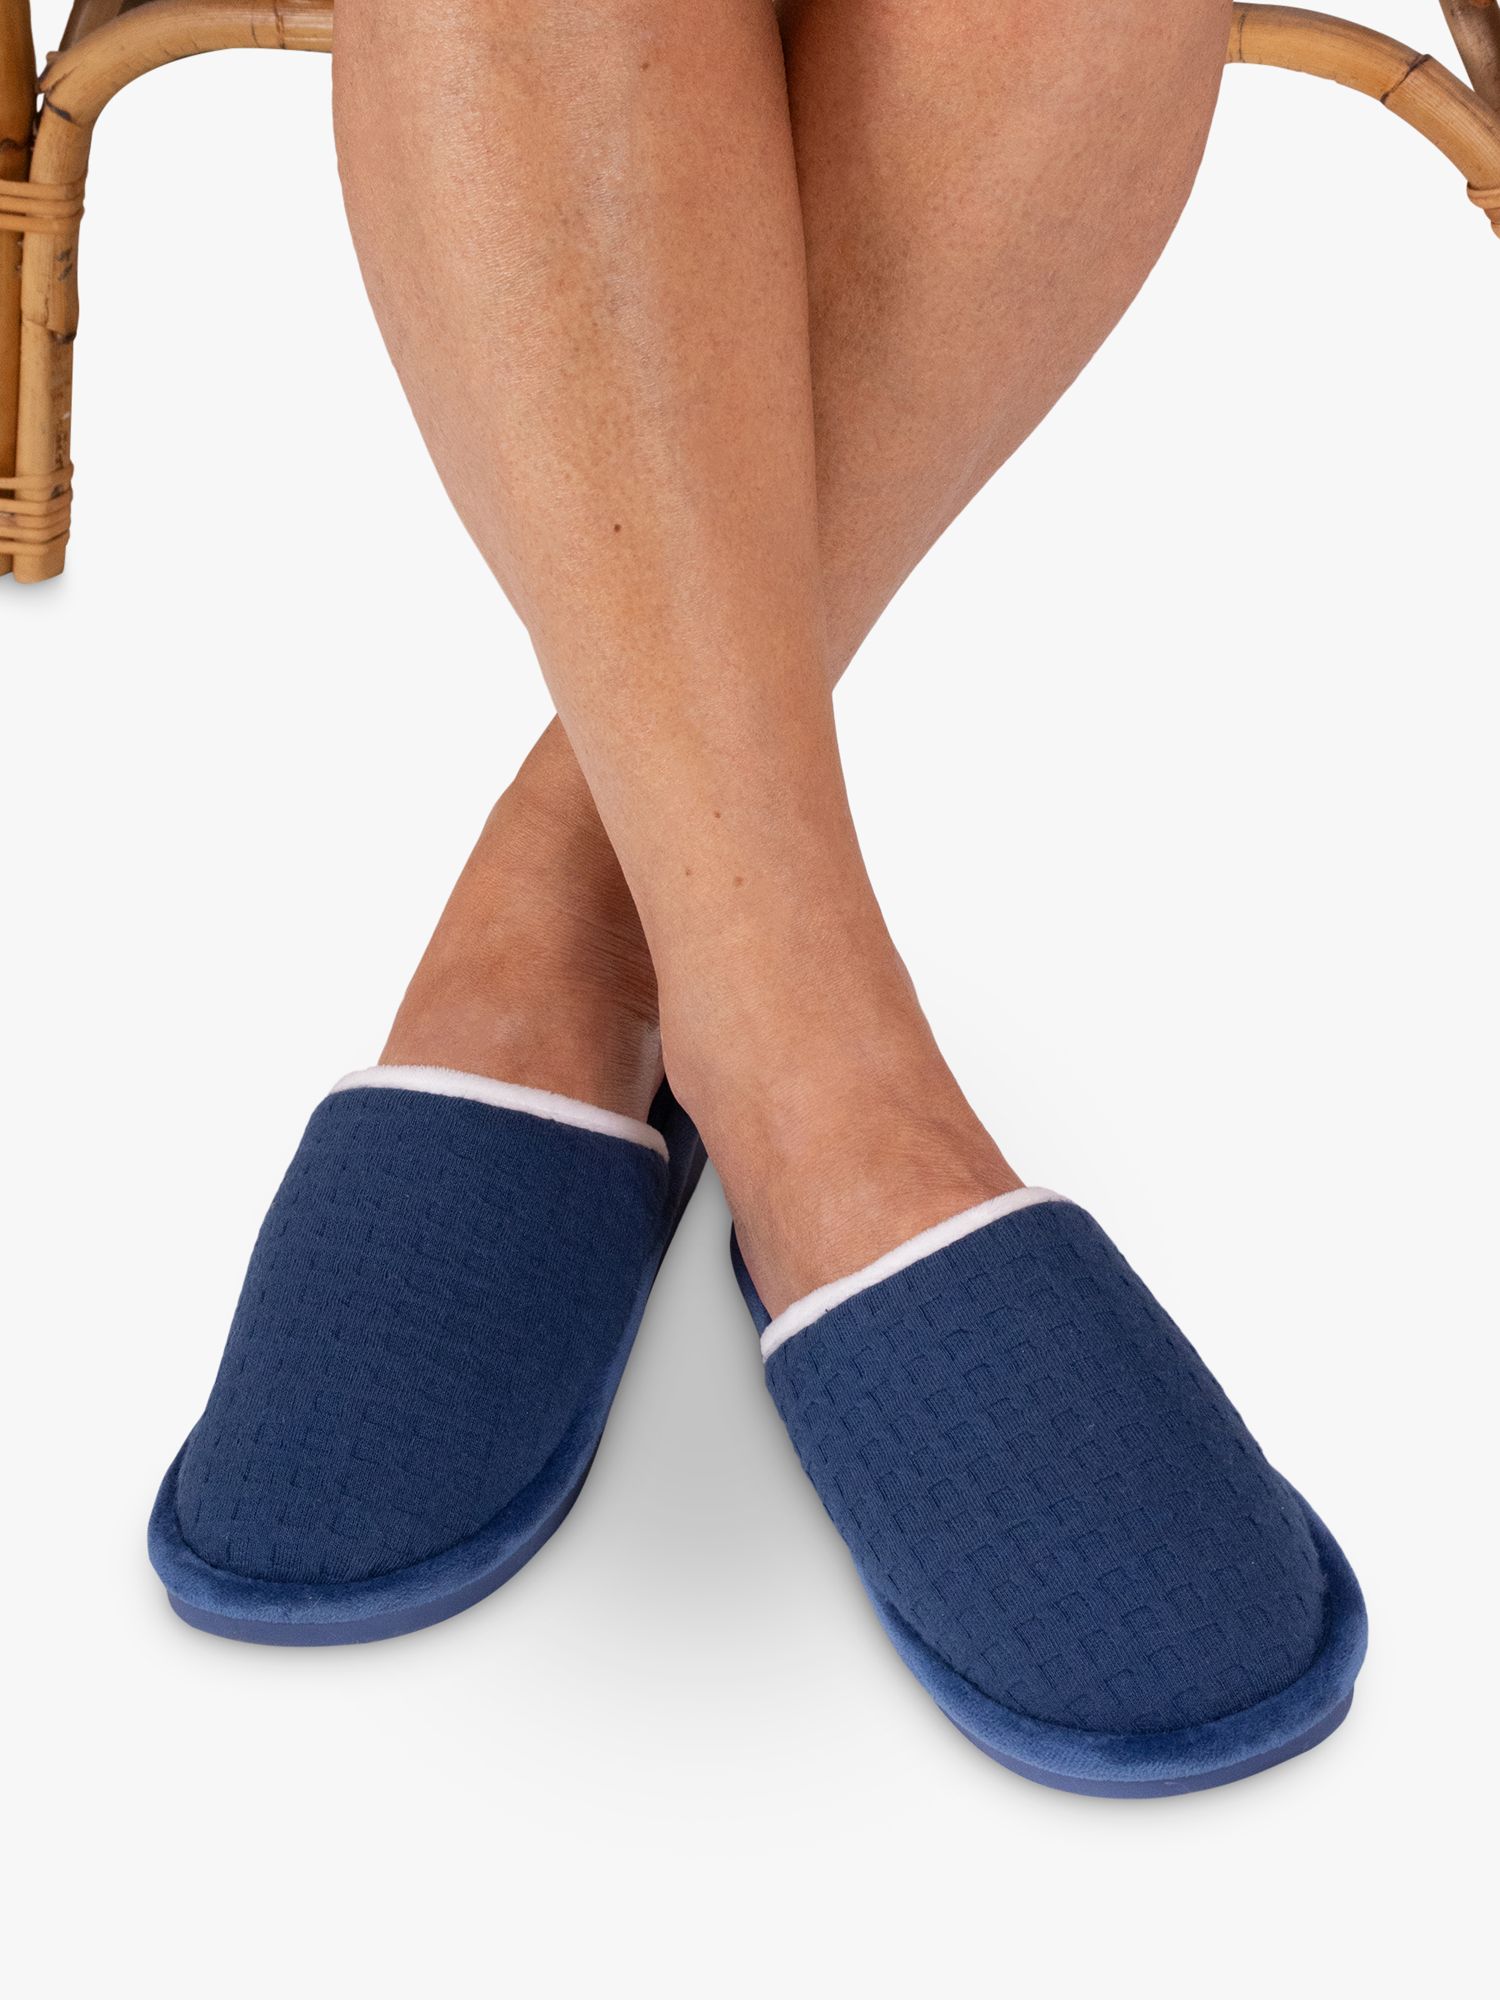 Buy Pretty You London Gia Waffle Mule Slippers Online at johnlewis.com